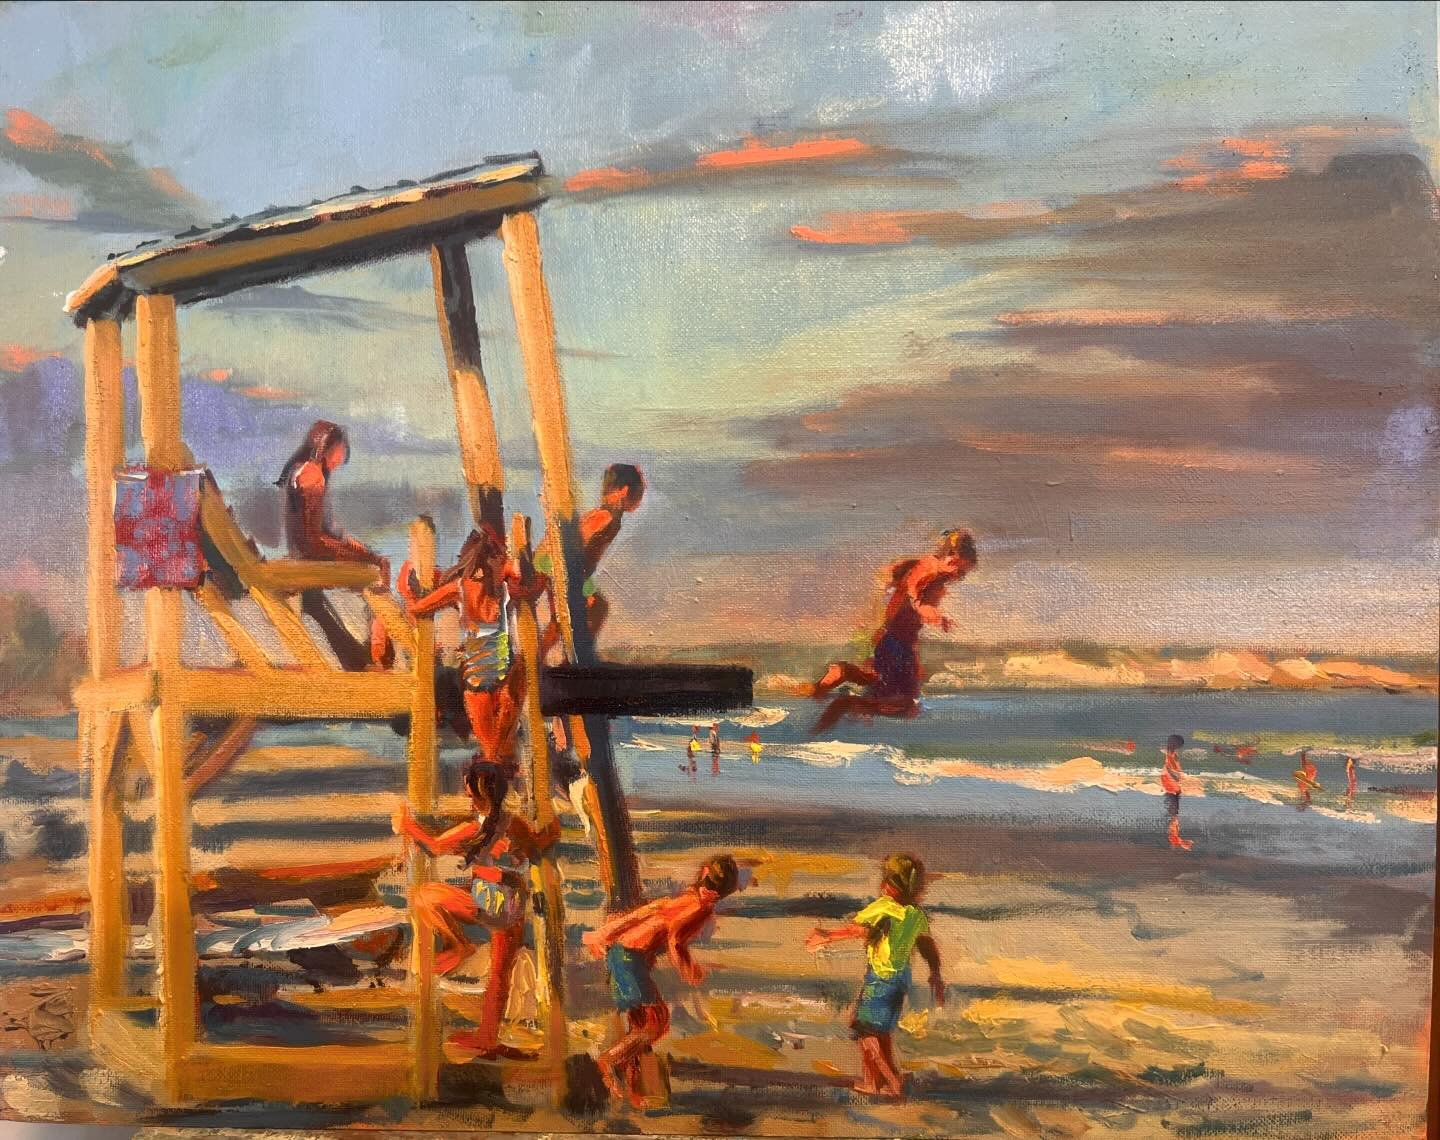 At 6:00pm the Lifeguards go off duty. Kids wait for this moment to climb on the guard stands and jump off. The perfect magic hour memory. Halcyon days❤️